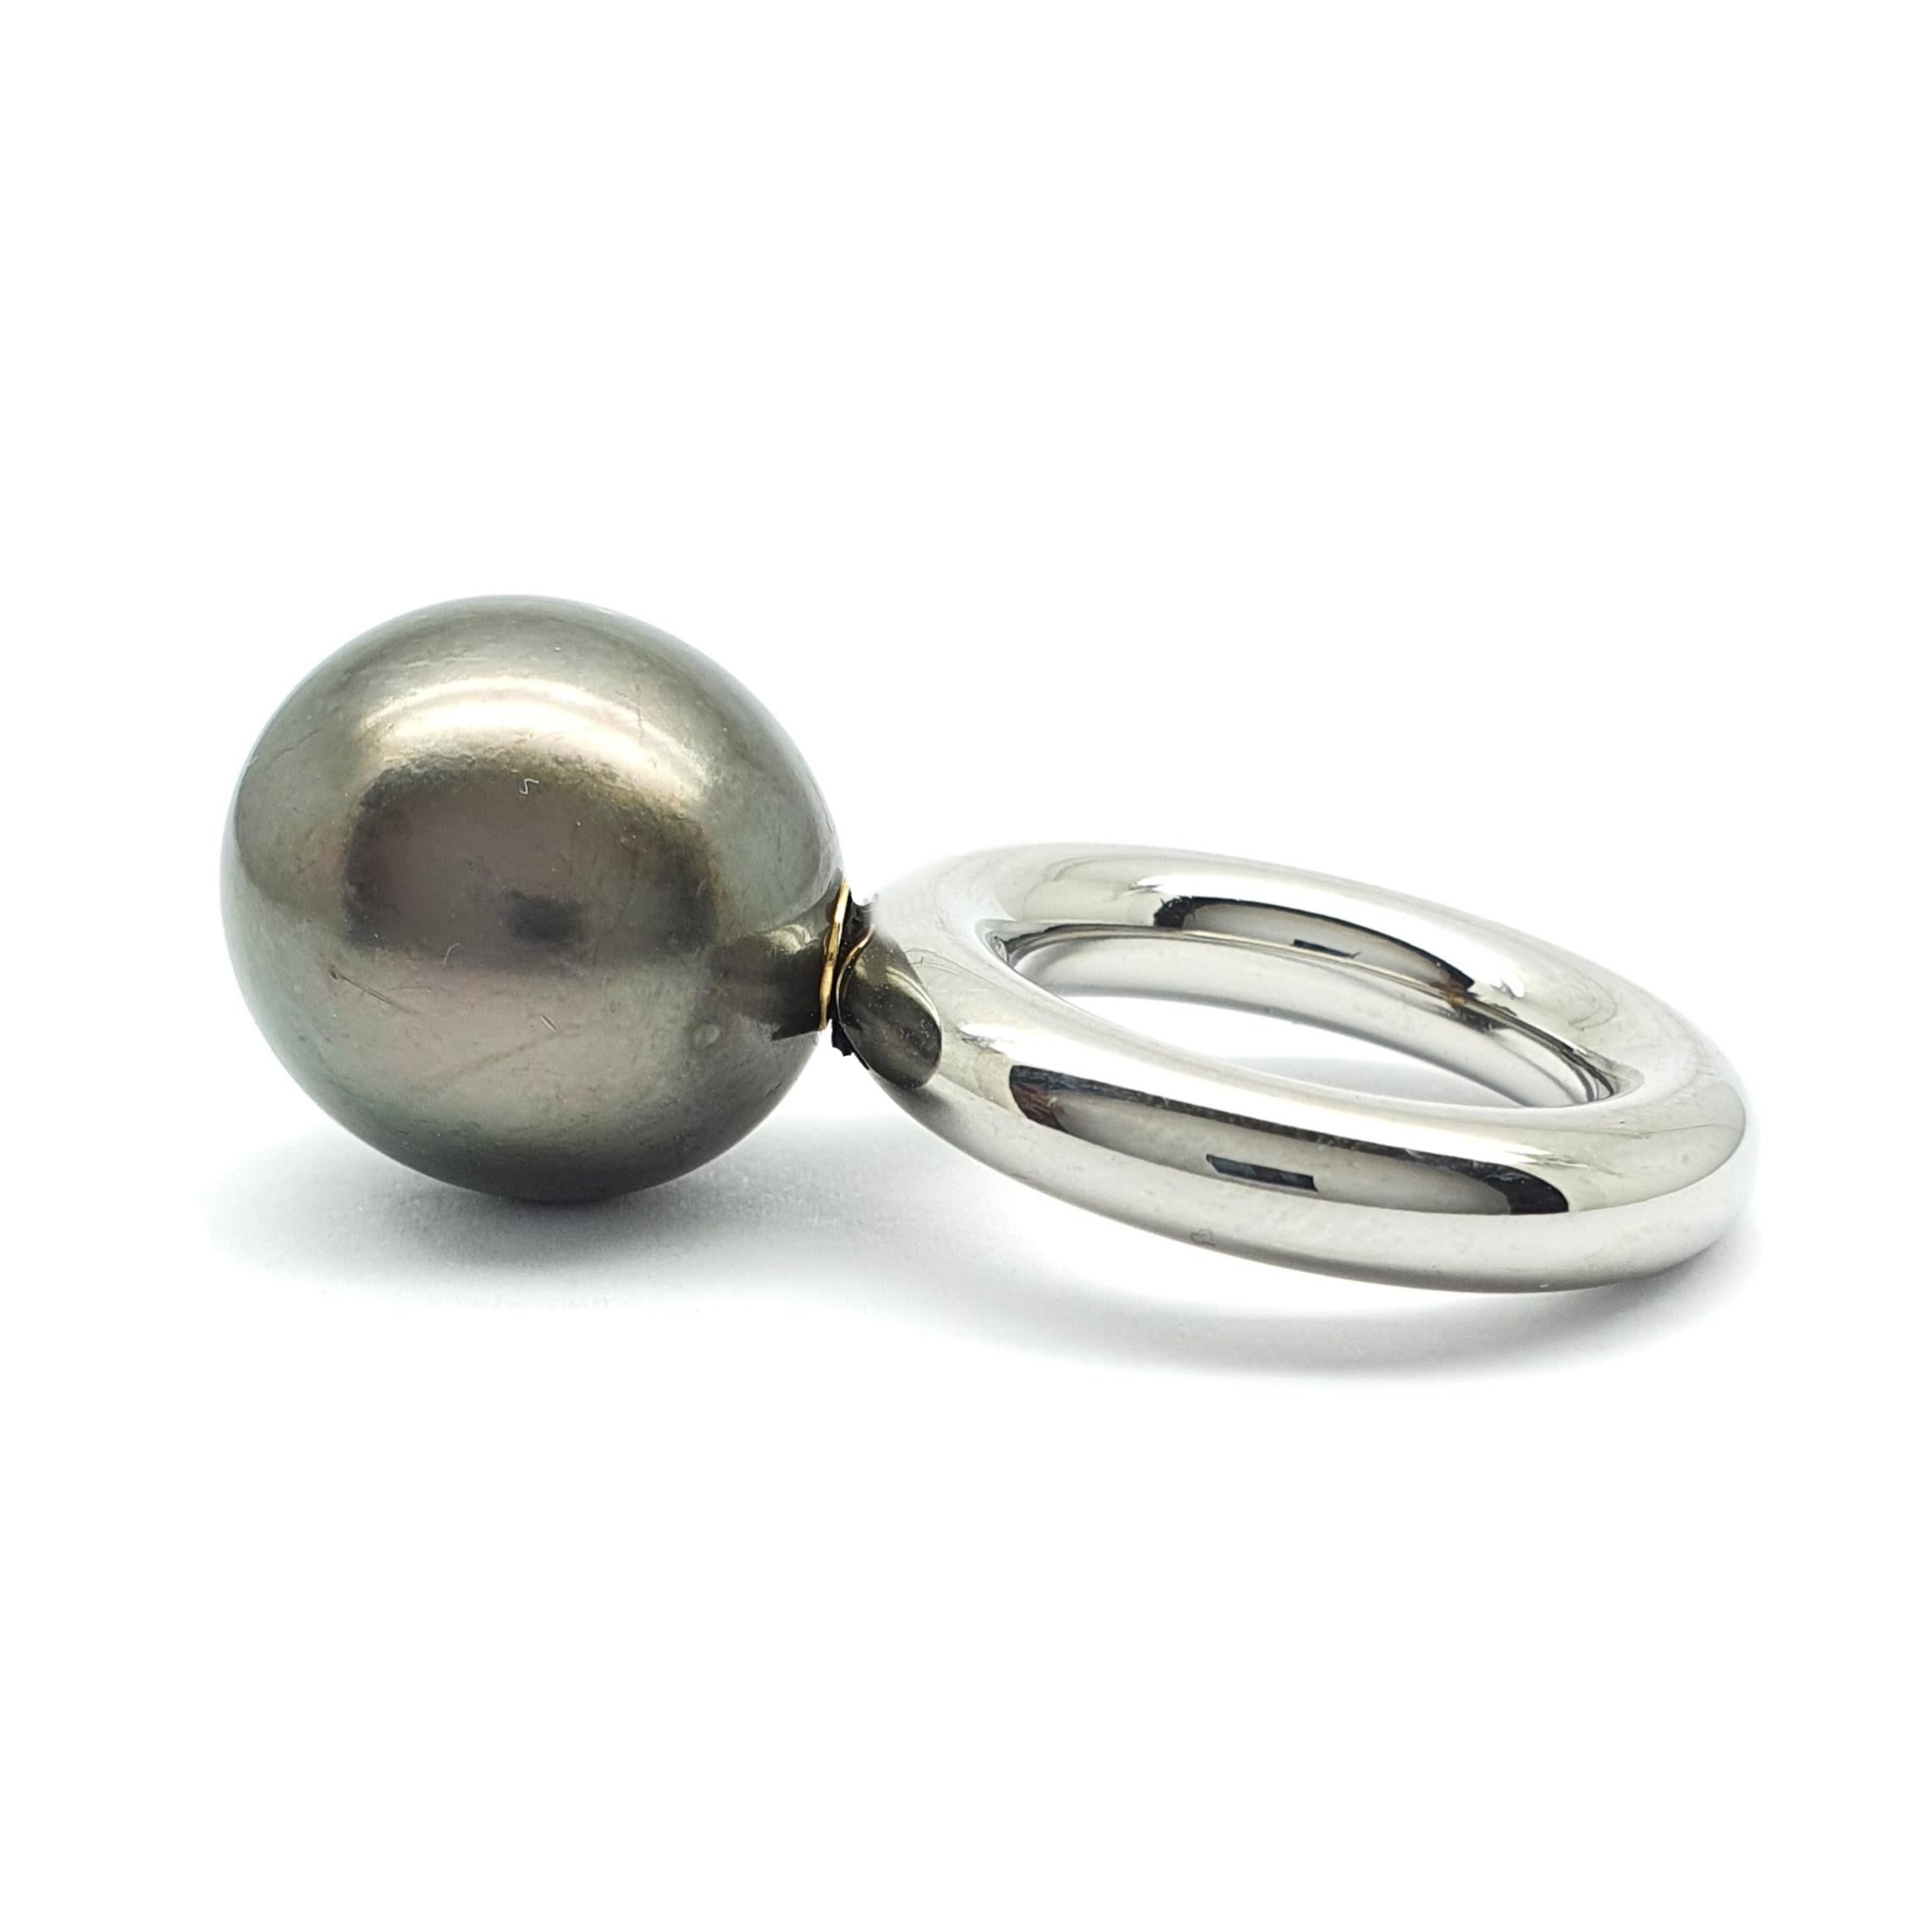 A high quality dark 18.3mm Tahiti pearl with 14 Carat Yellow Gold component attachment. This beautiful pearl can be bought as a single component to attach on a ring or can be fixated on a ring to last. Rings are made of yellow, rose and white gold